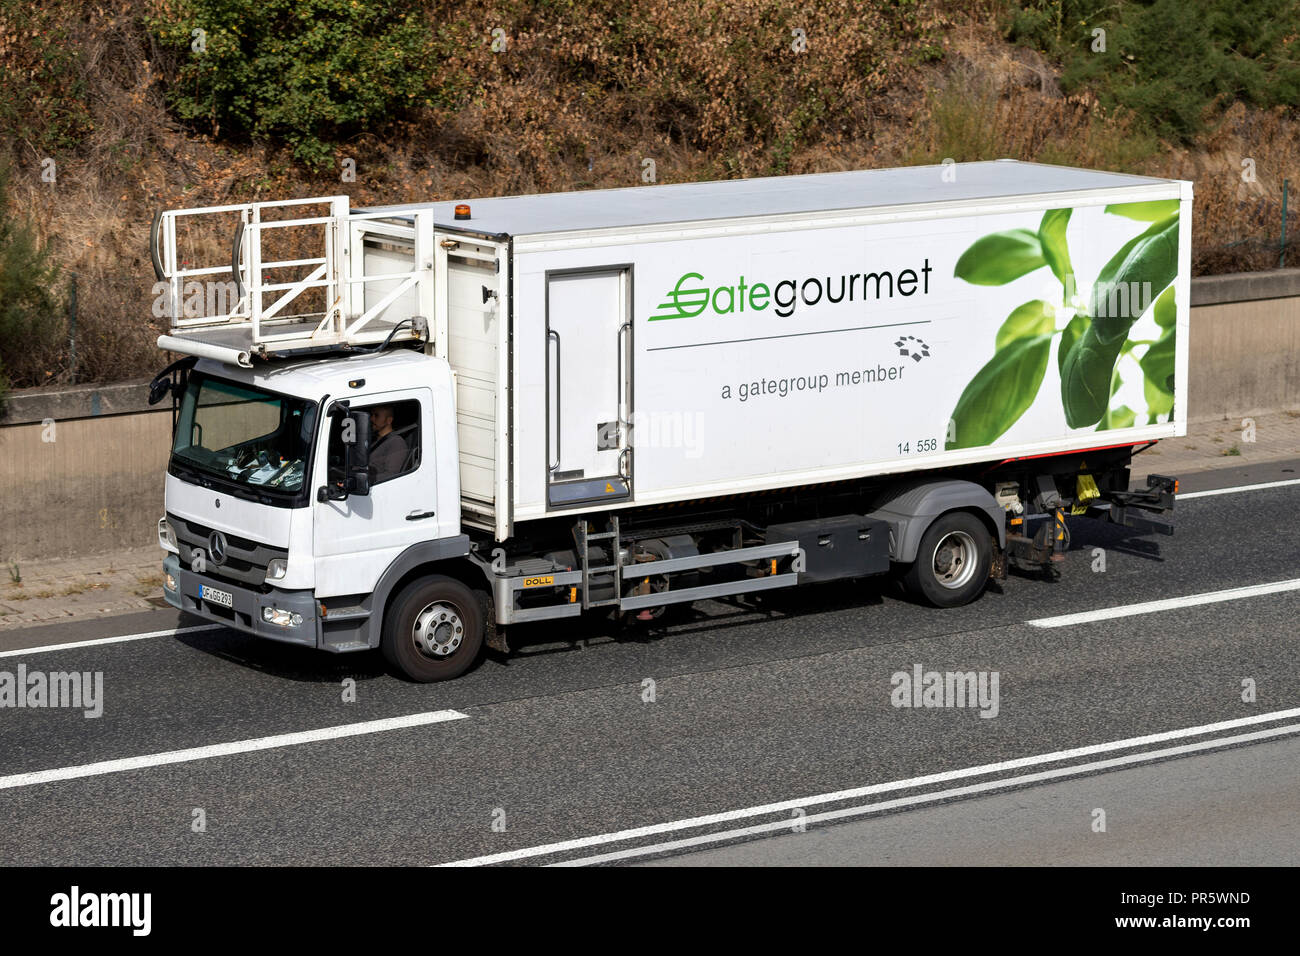 Gate Gourmet catering truck on motorway. Gate Gourmet is a leading global provider of airline catering and provisioning. Stock Photo